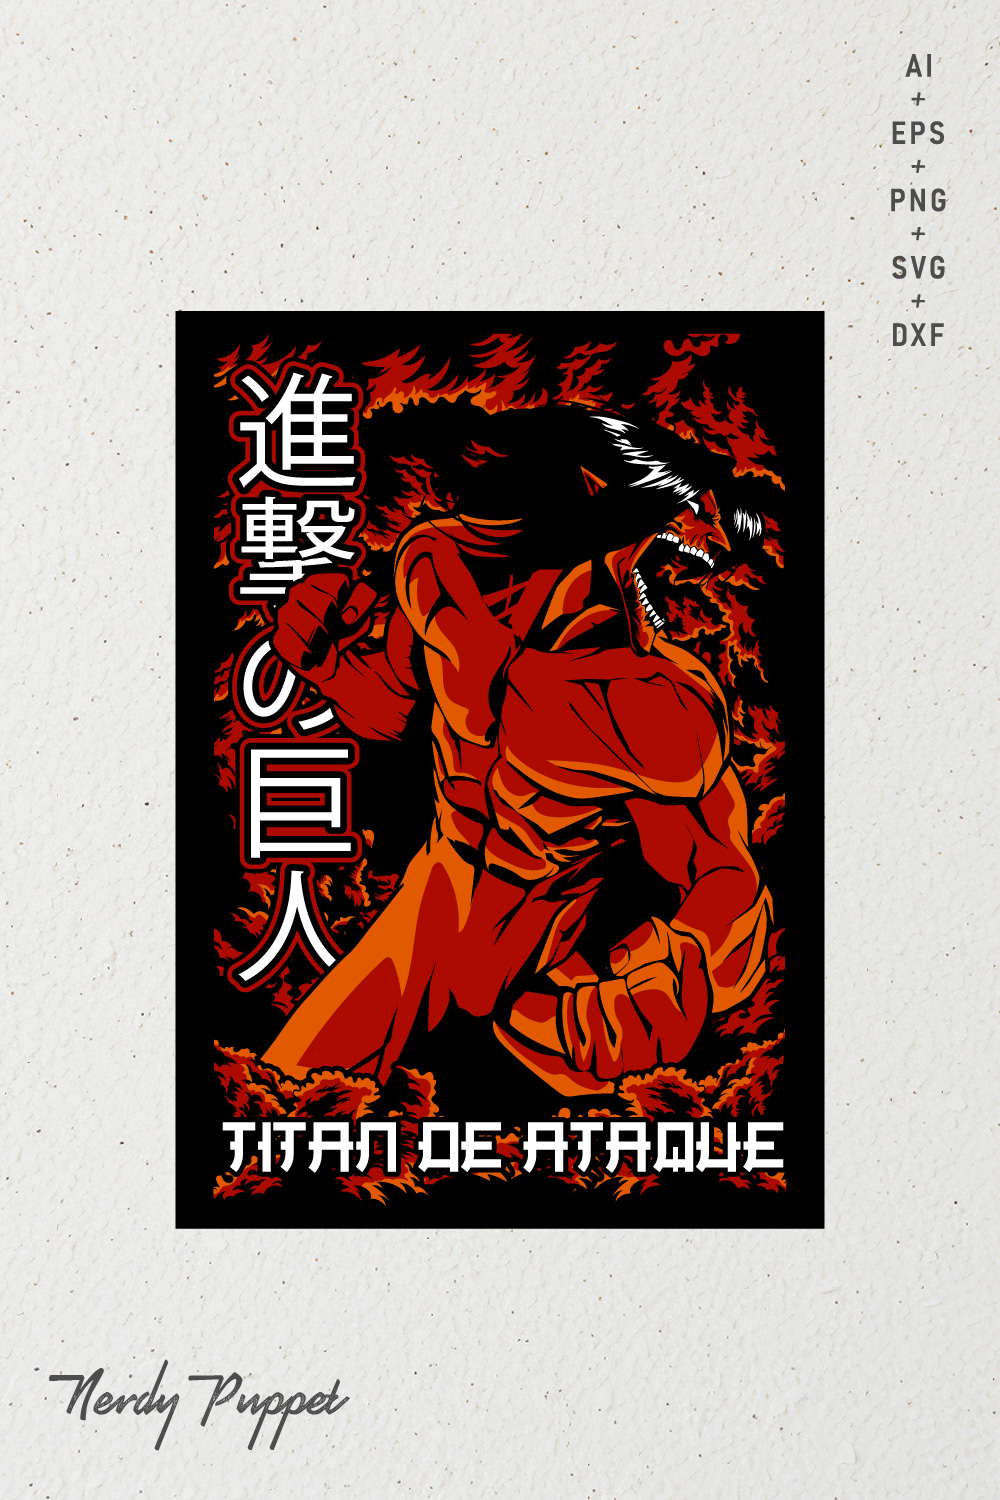 Attack on Titan pinterest preview image.